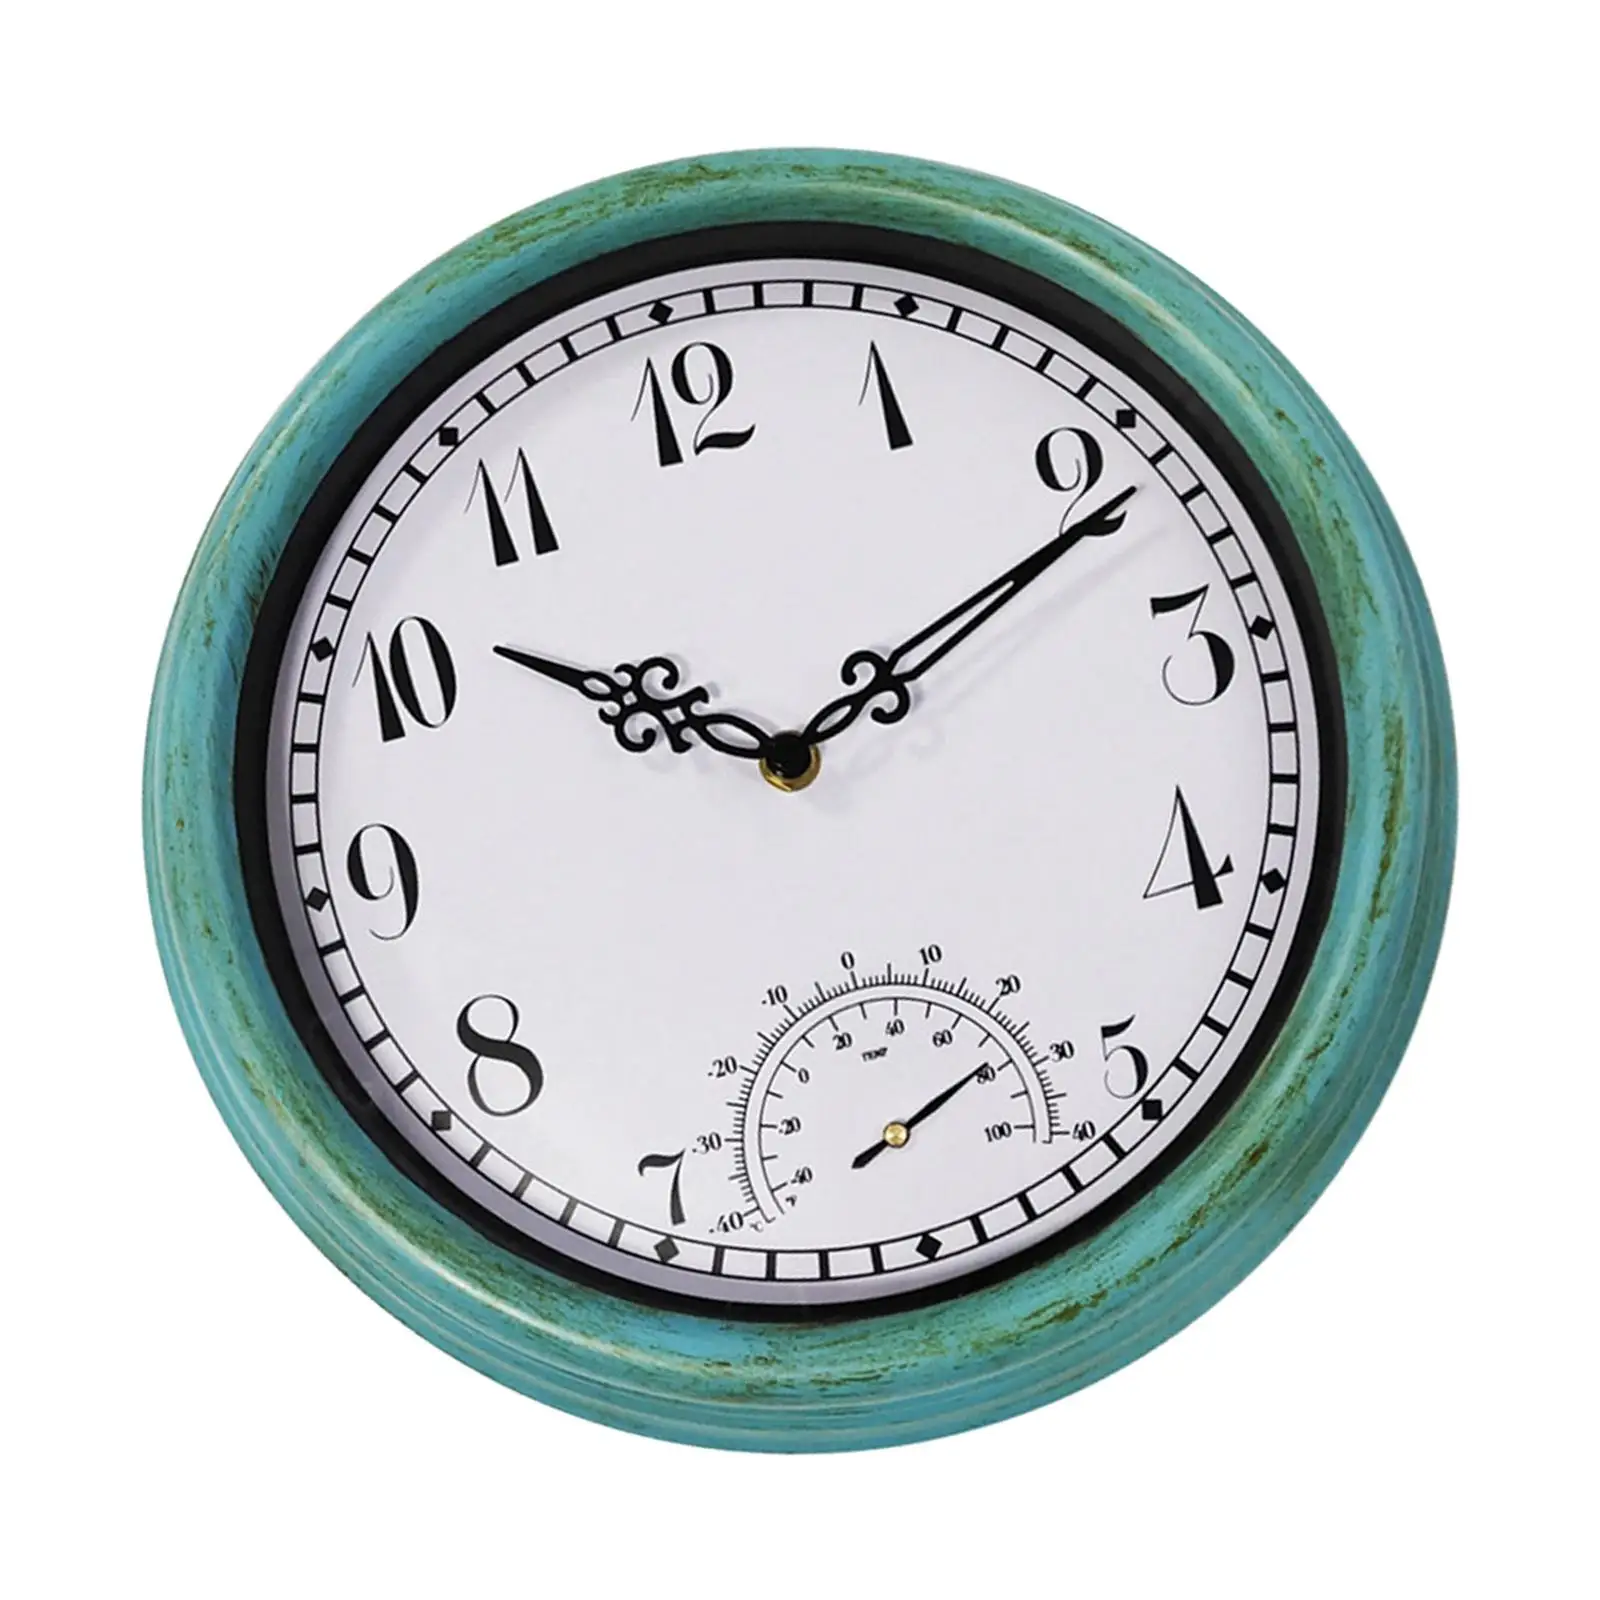 12 inch Wall Clock Accuracy Silent No Ticking Round Clock Wall Decorative for Outdoor Indoor Patio Fence Kitchen Sauna Room